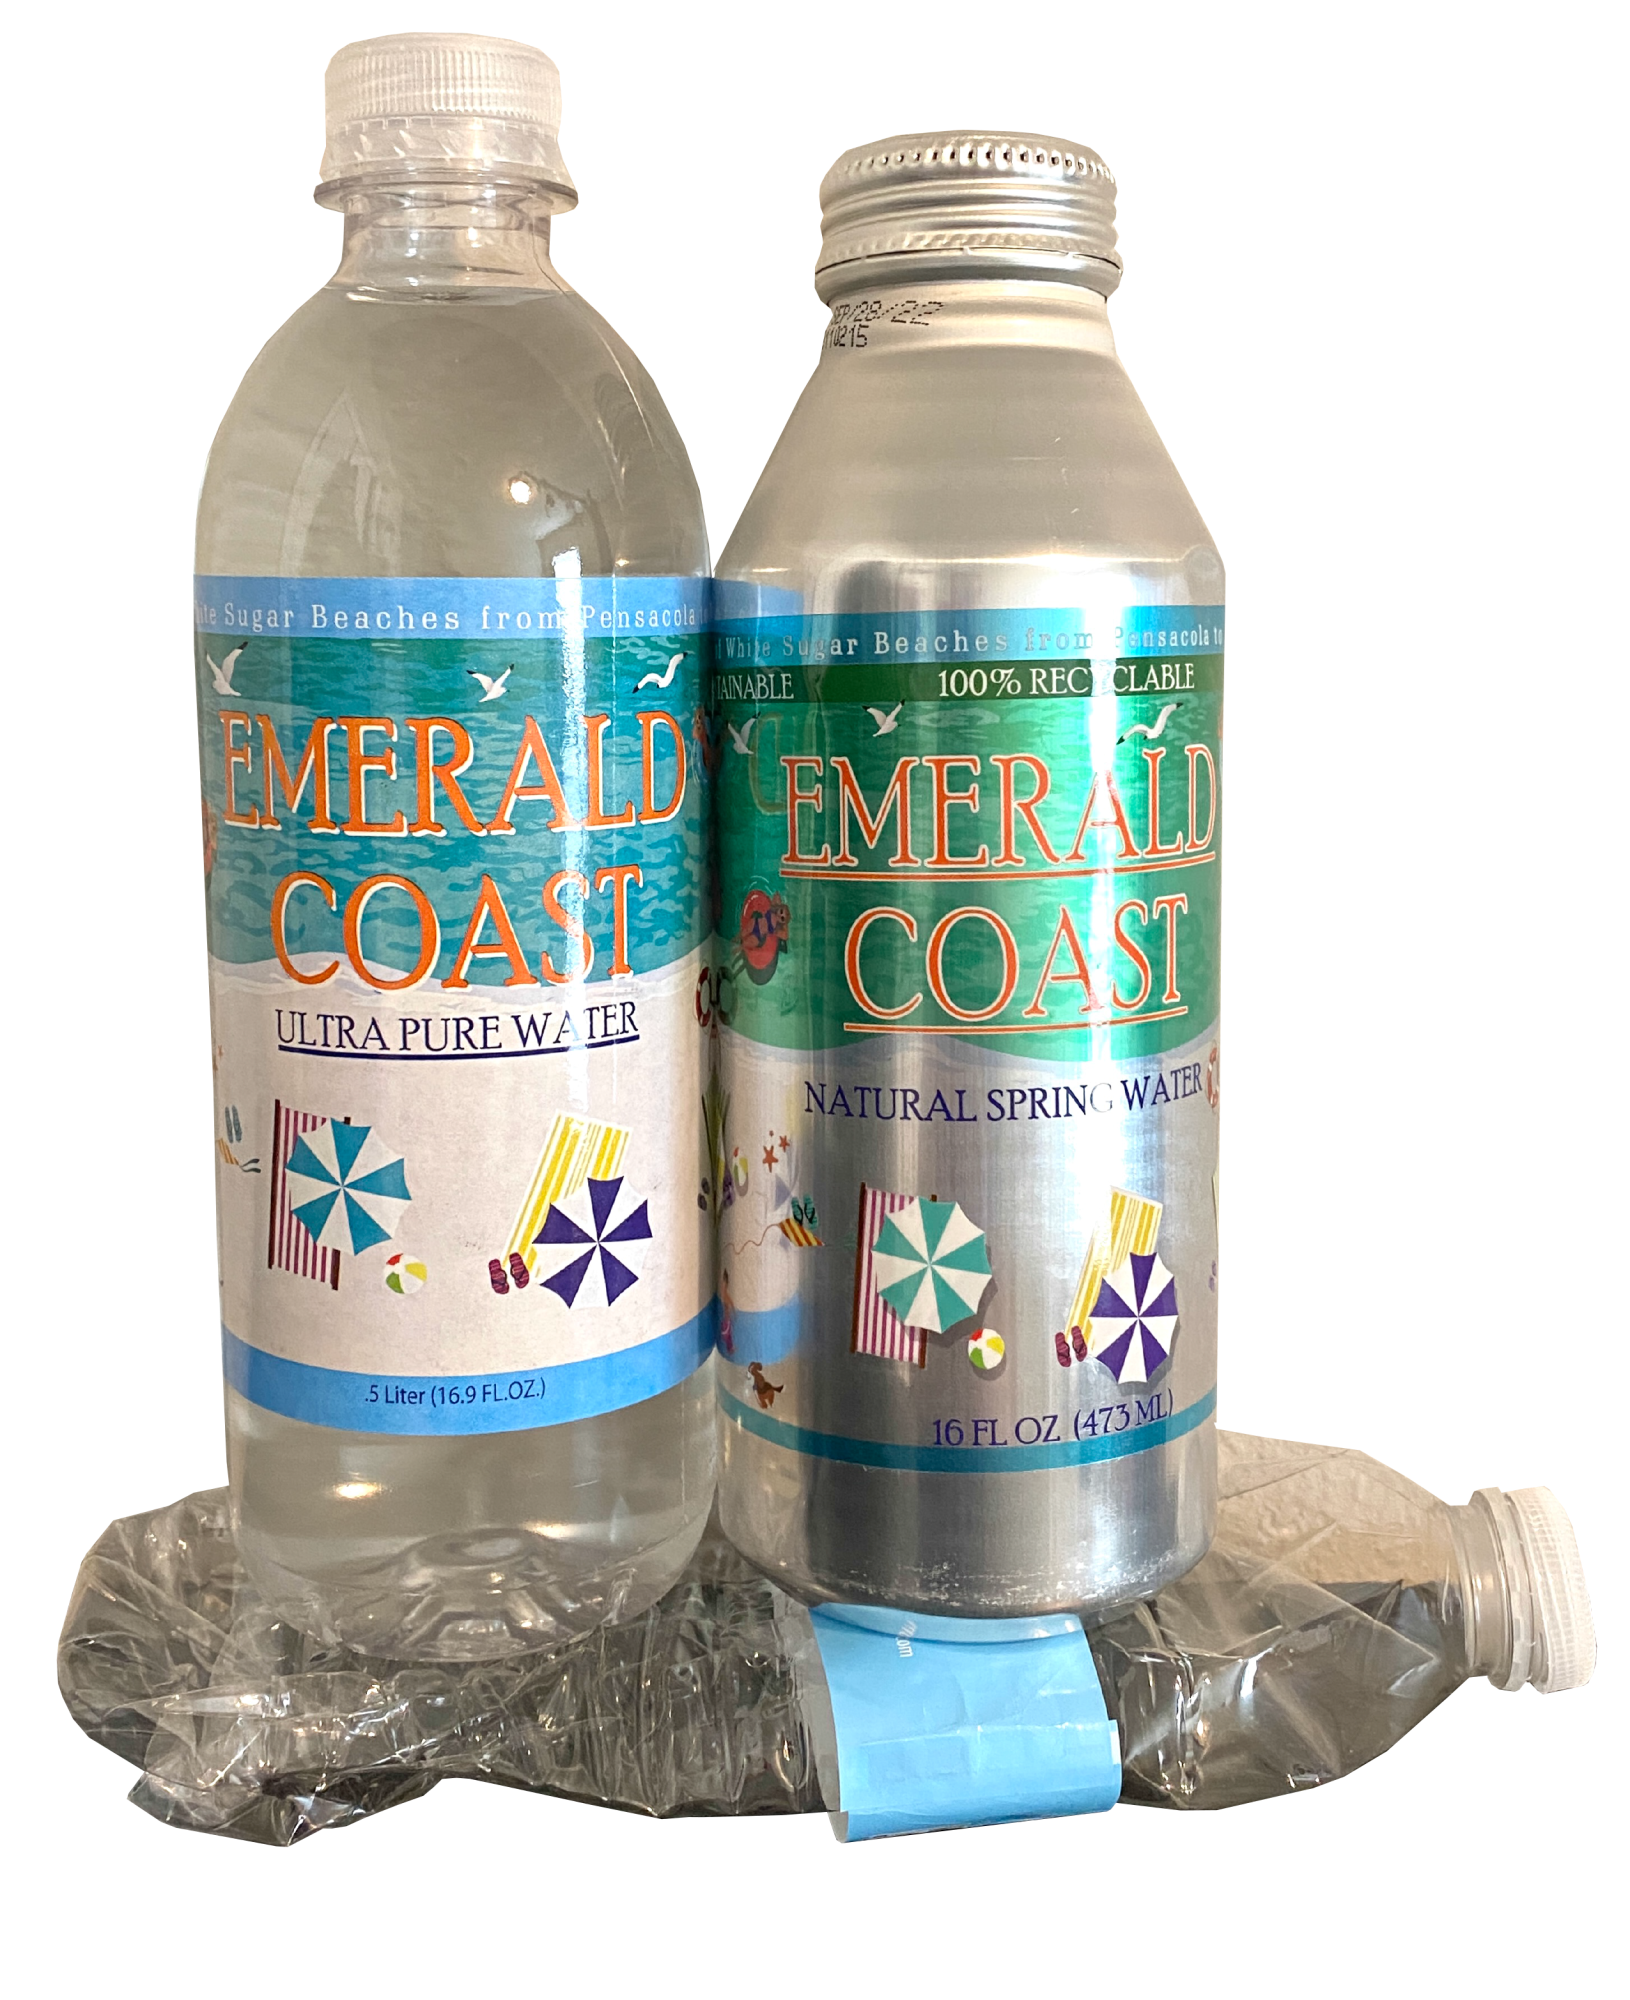 https://www.emeraldcoastpurewater.com/assets/Emerald_Coast_Ultra_Pure_Water_16.9oz_in_bpa_a_free_bottle_and_100__aluminum_bottles.png